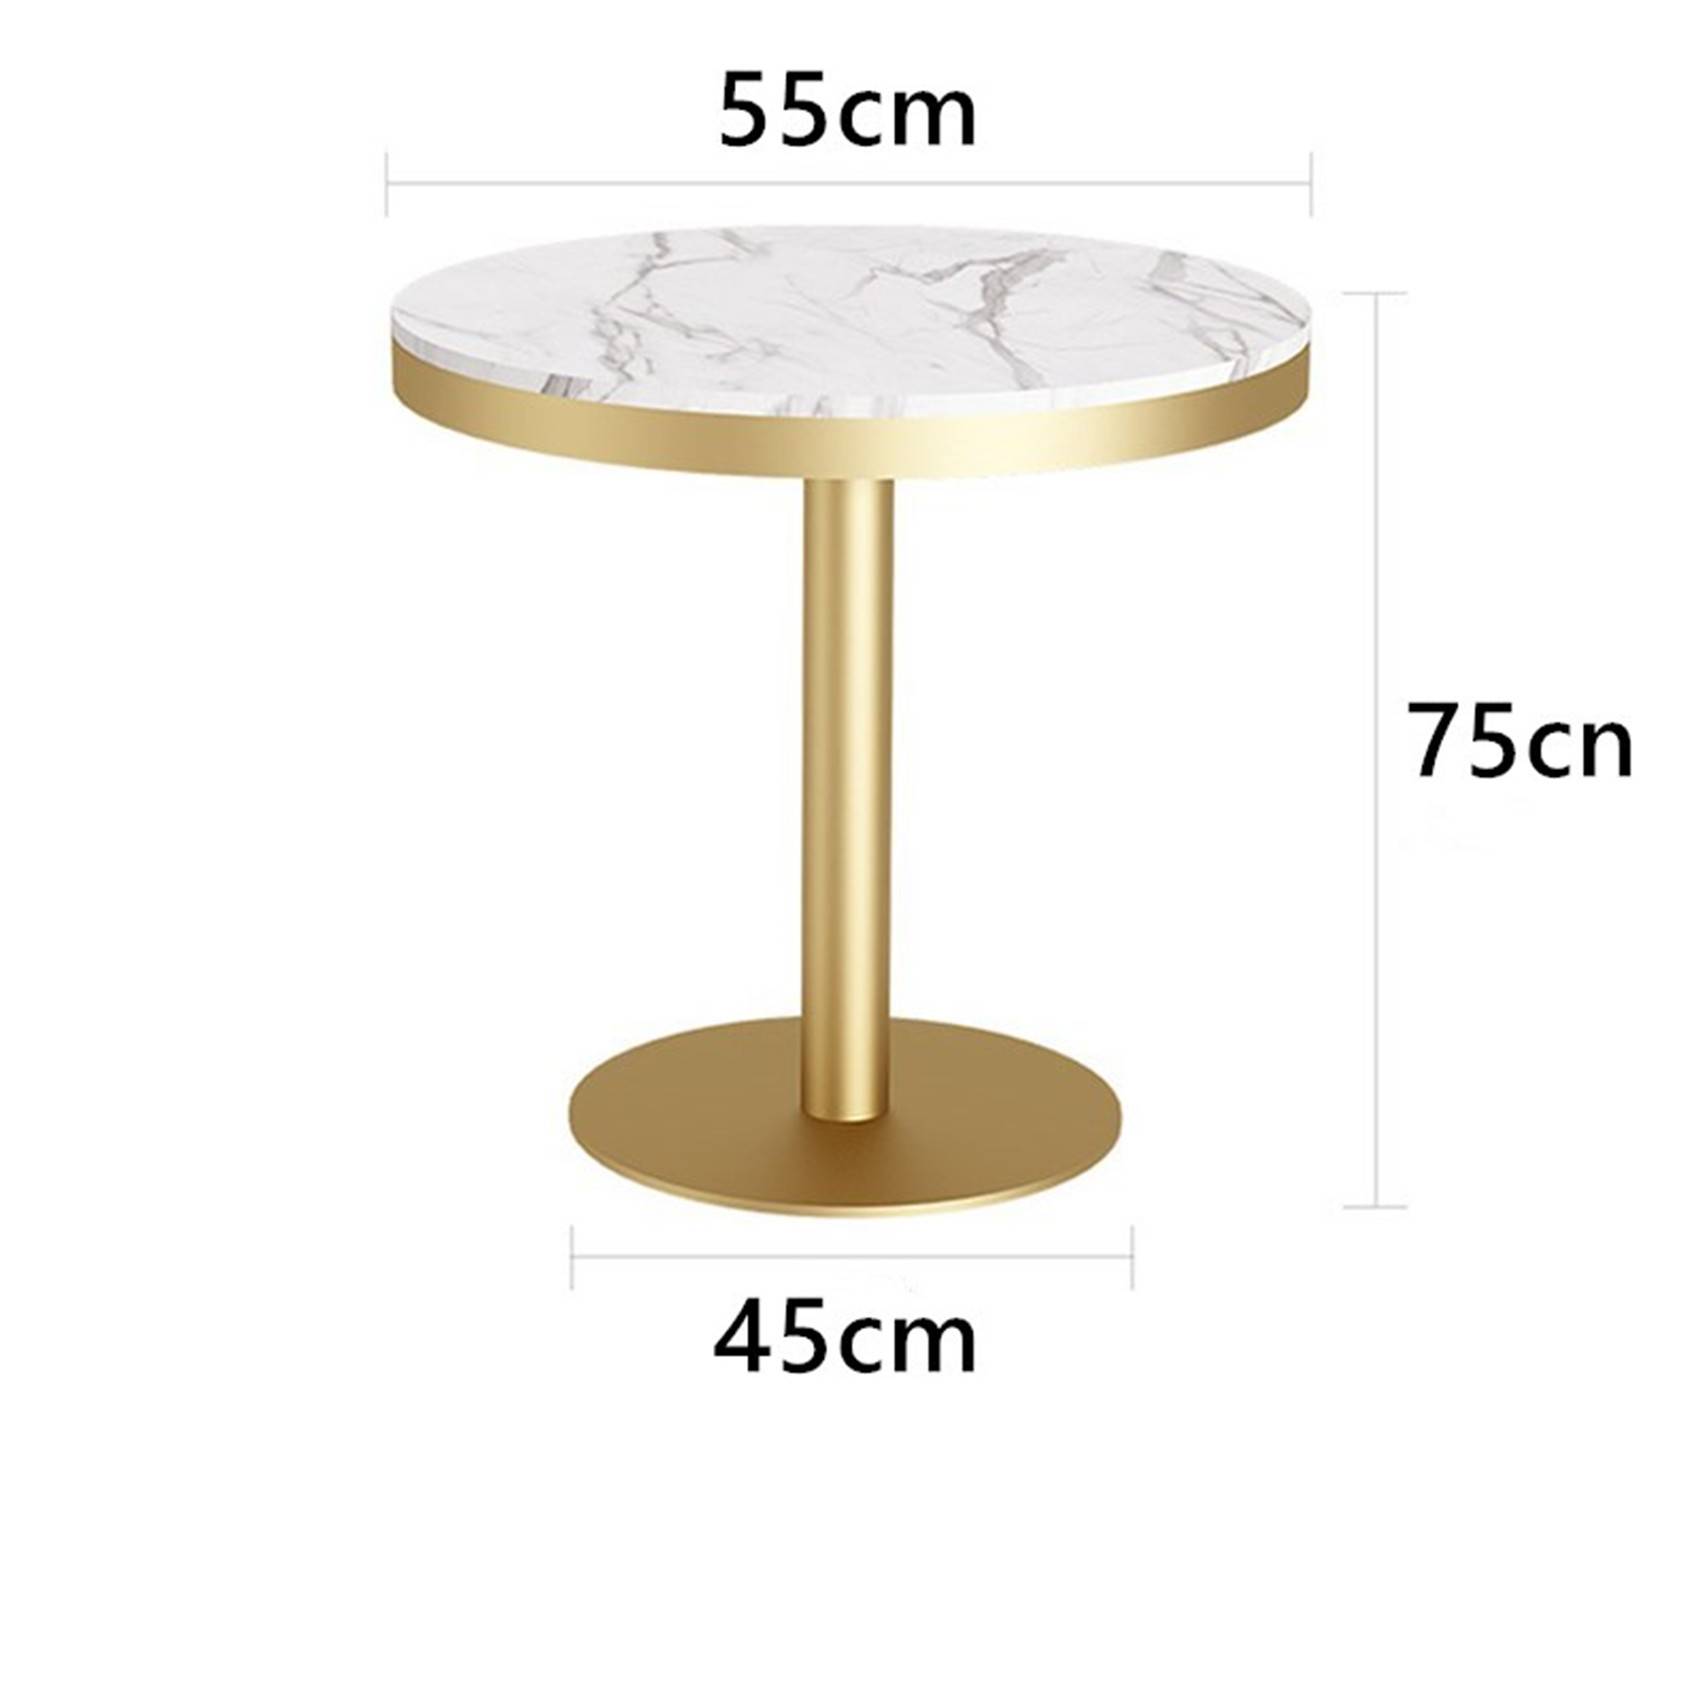 #Name: #Dining table